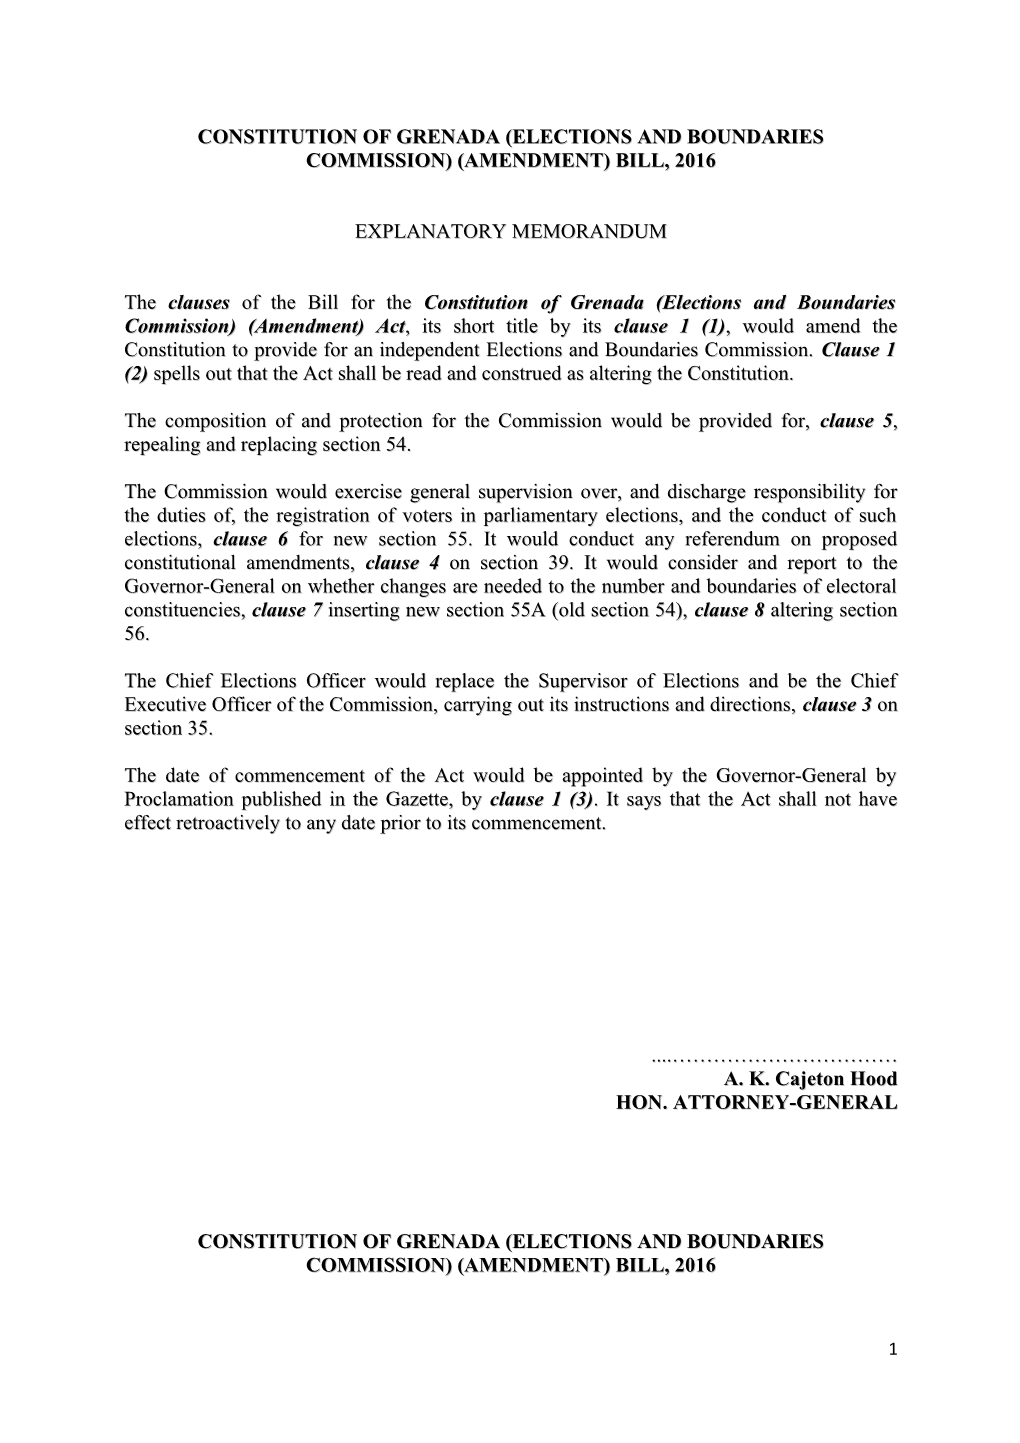 Constitution of Grenada (Elections and Boundaries Commission) (Amendment) Bill, 2016